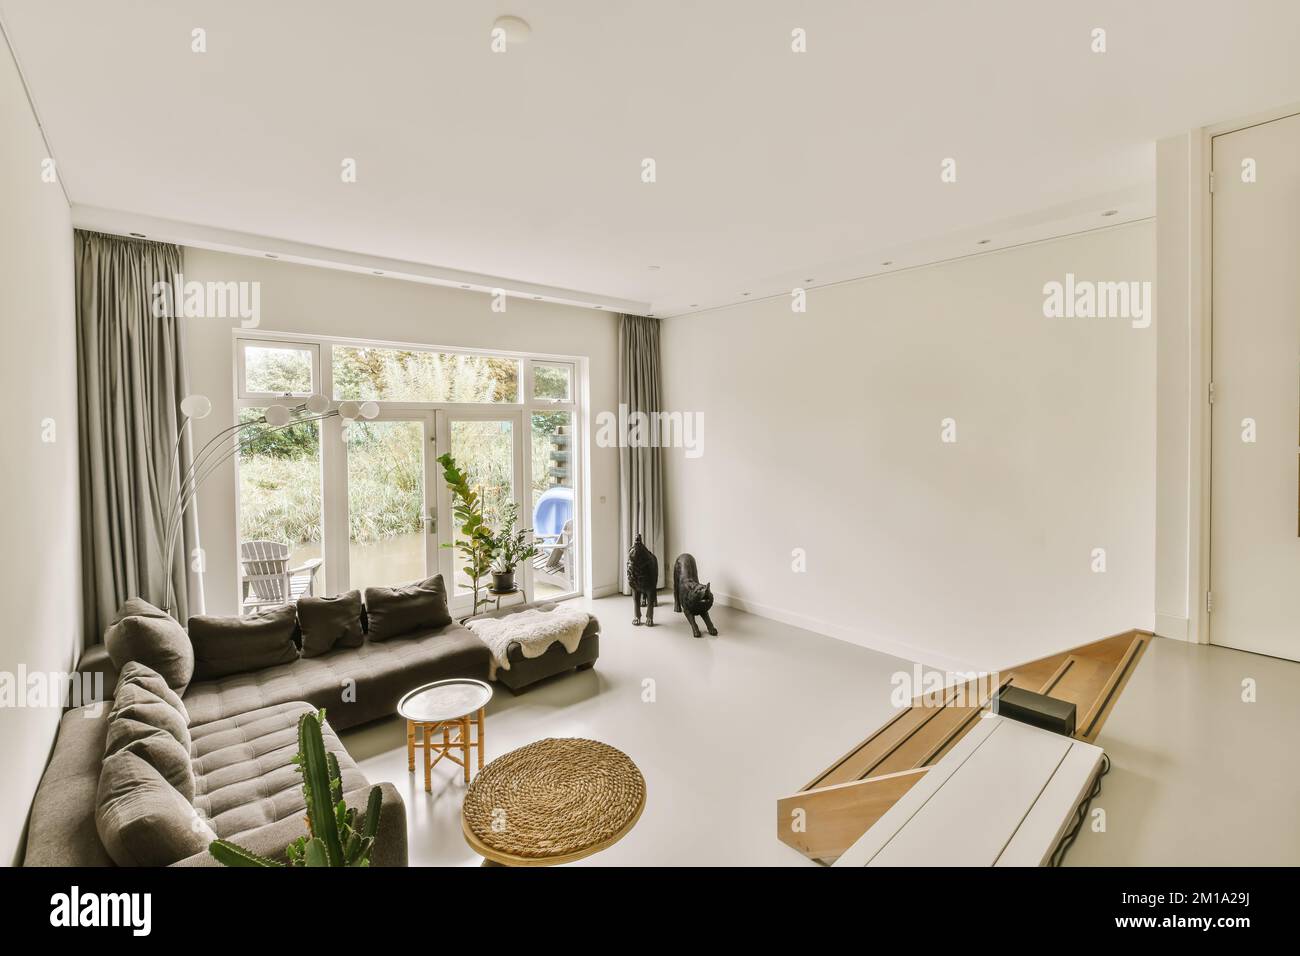 a living room with couches, coffee table and large window looking out onto the backyard garden in the background Stock Photo